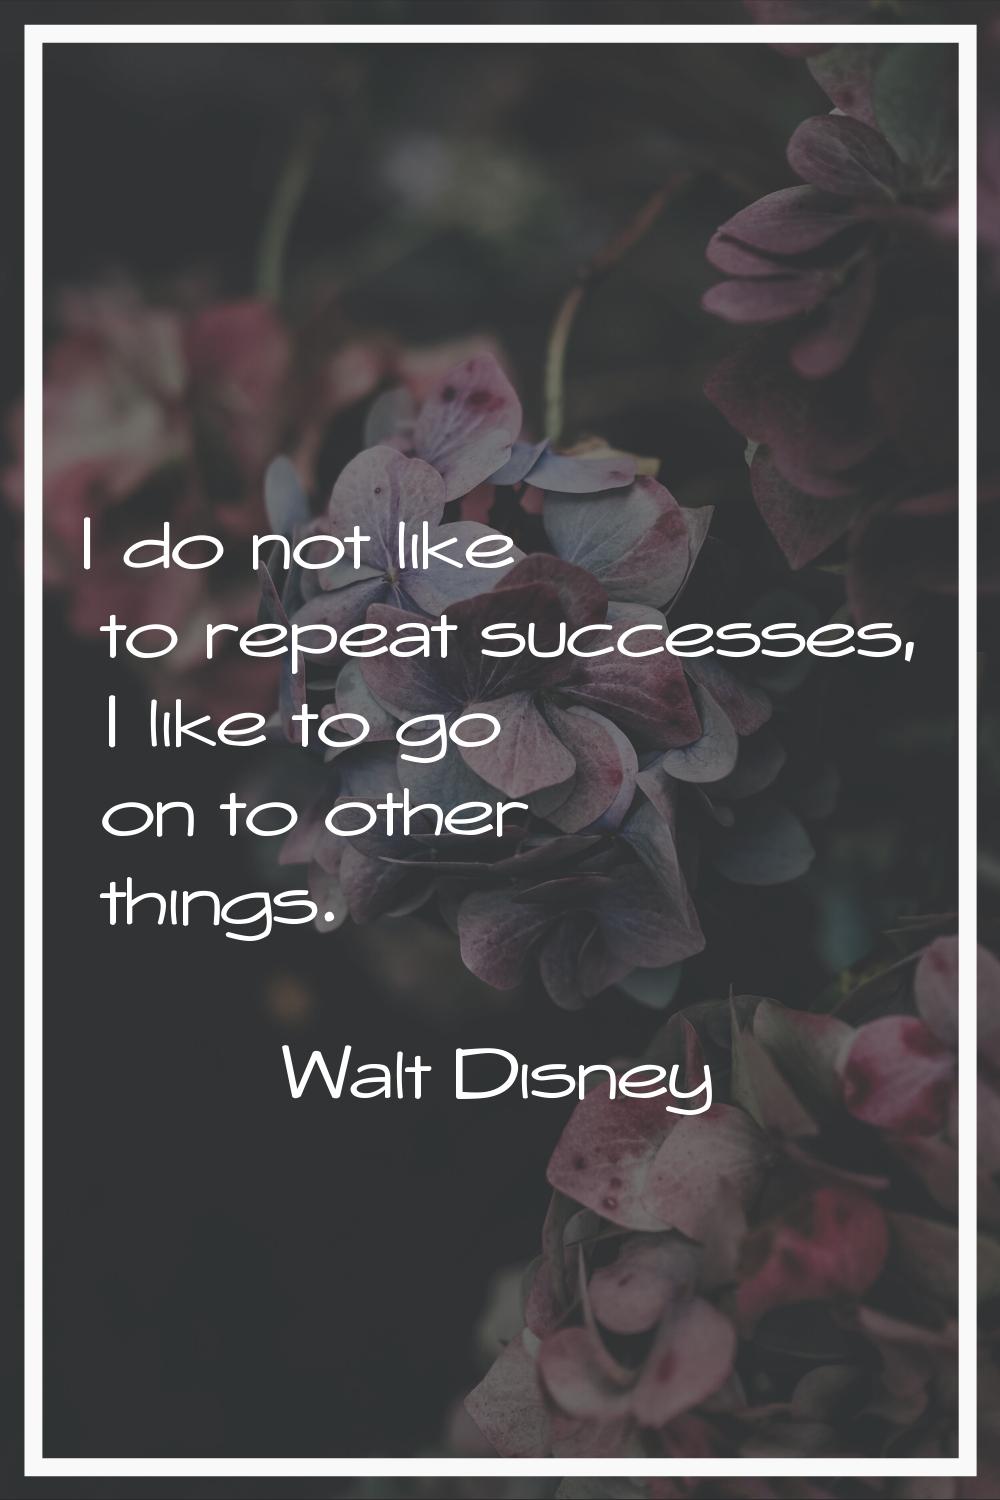 I do not like to repeat successes, I like to go on to other things.